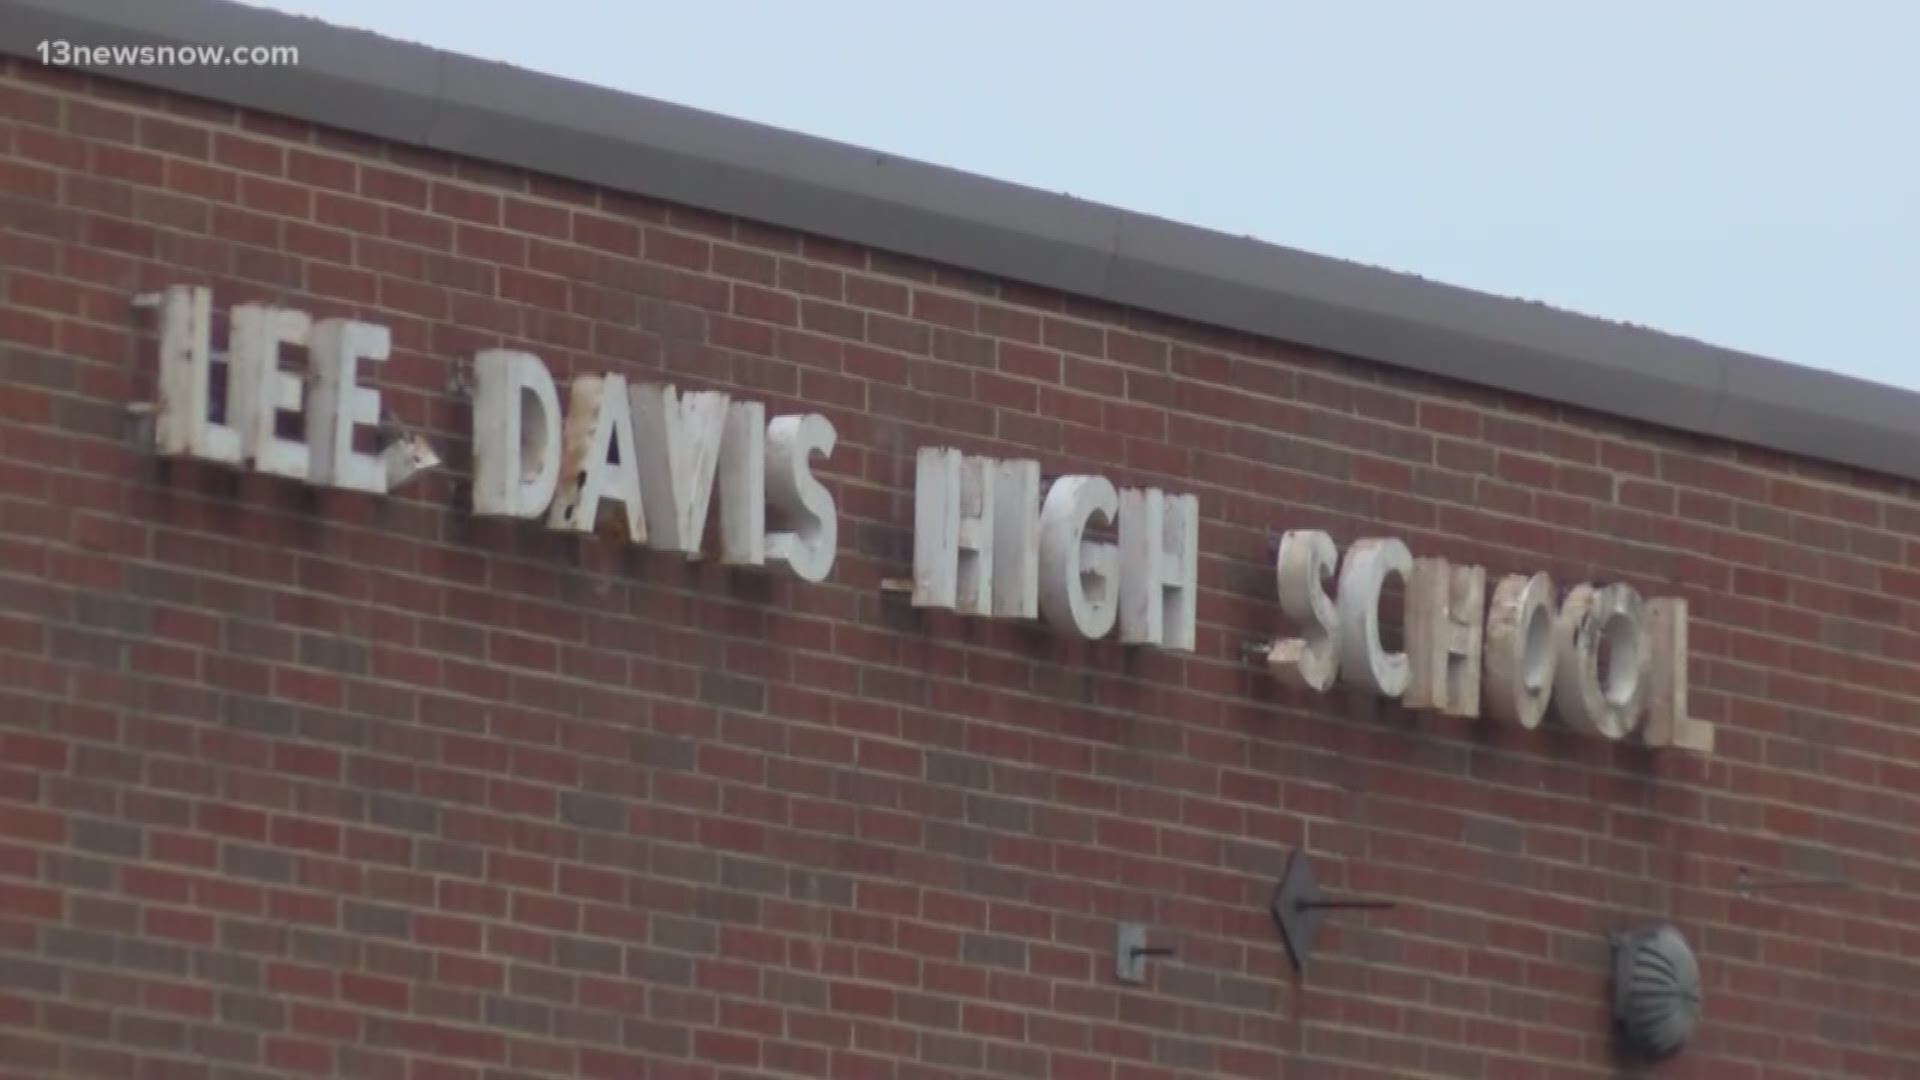 A local chapter of the NAACP is suing a Virginia county in an effort to change the names of schools named in honor of Confederate leaders.